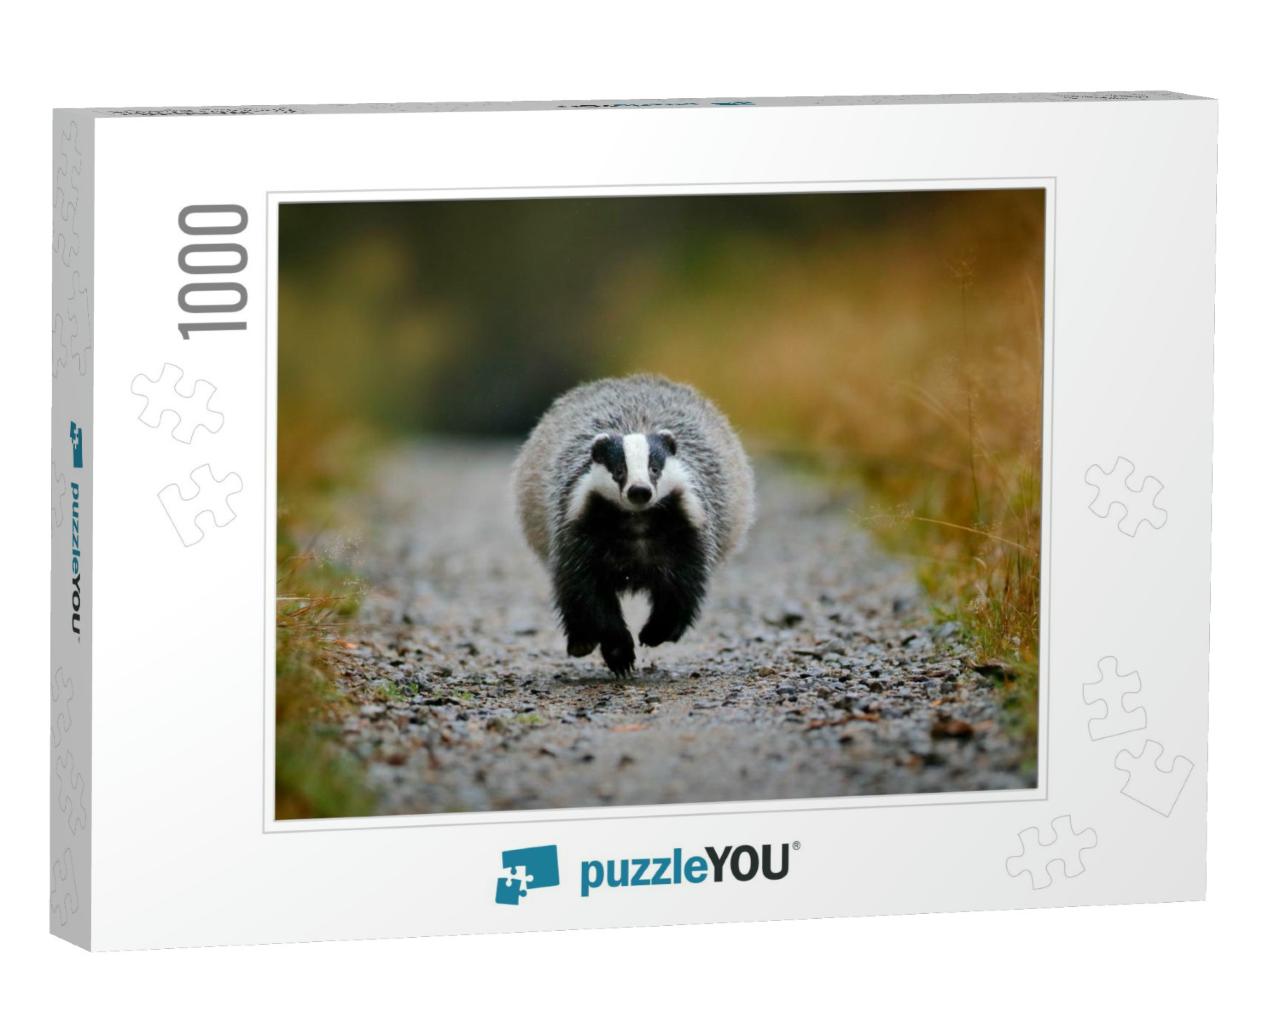 Badger Running in the Forest Gravel Road. Action Wildlife... Jigsaw Puzzle with 1000 pieces